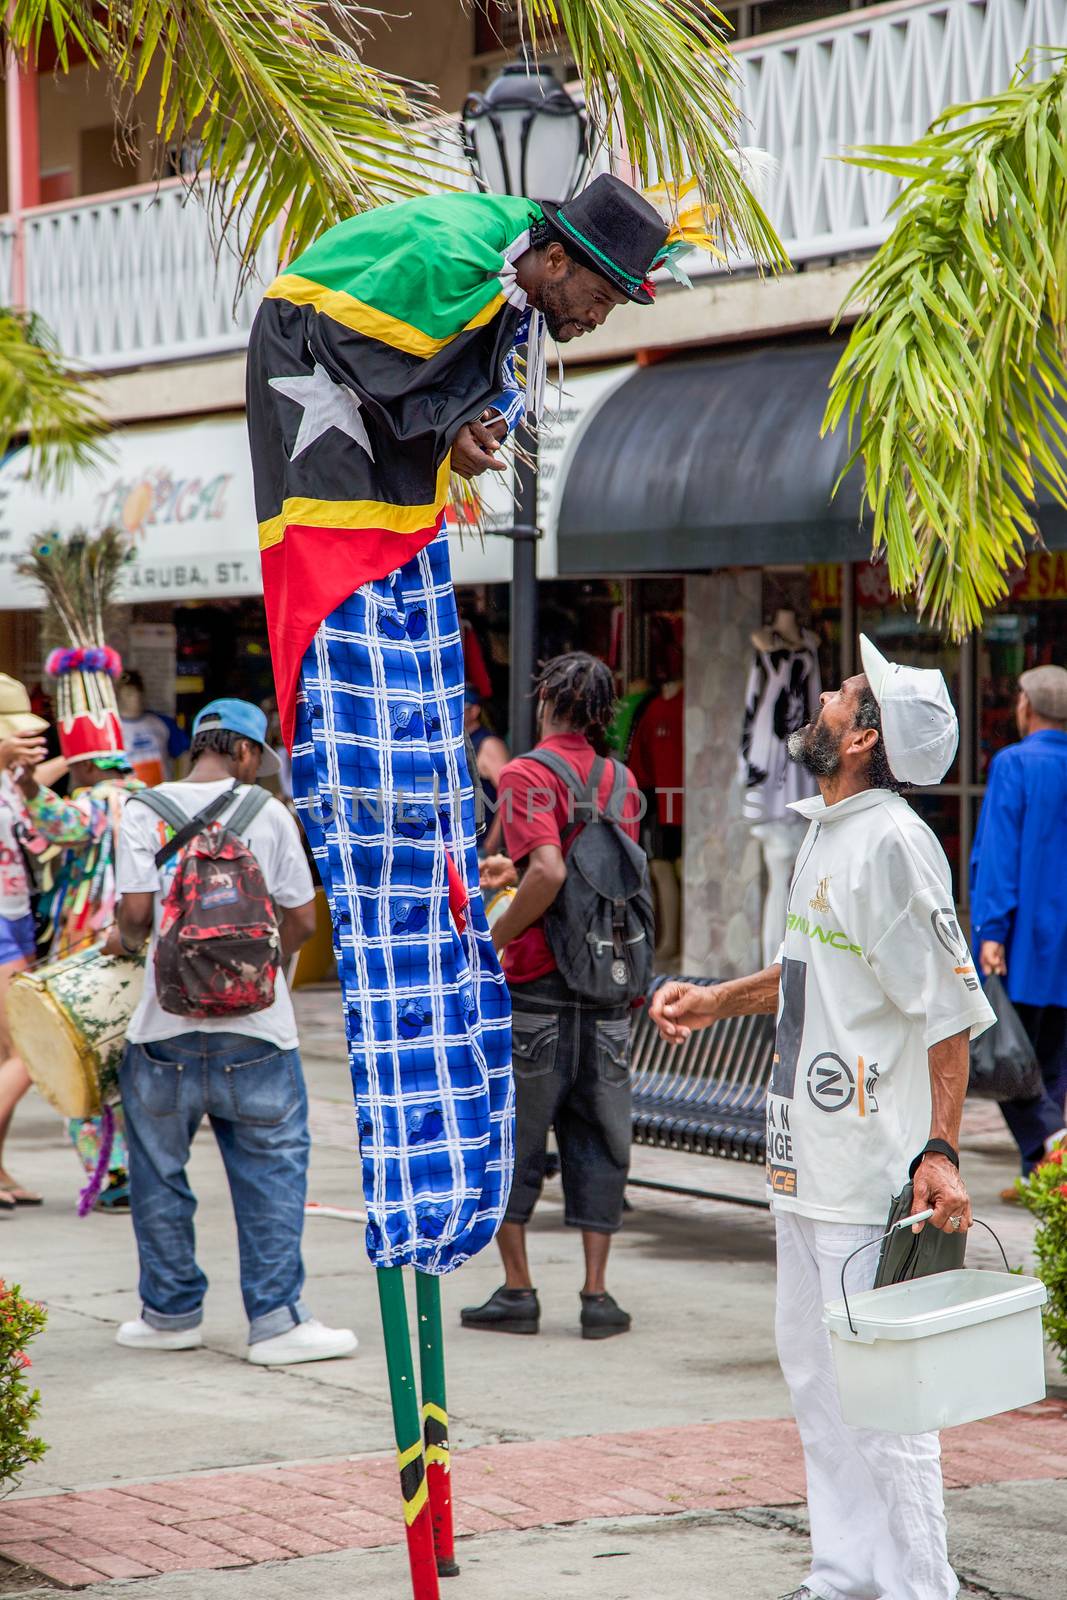 Basseterre, Saint Kitts and Nevis- June 21, 2013: Street performer wrapped up in his nation's flag and standing on stills stops to talk to a man after dancing with his dance troupe at Port Zante